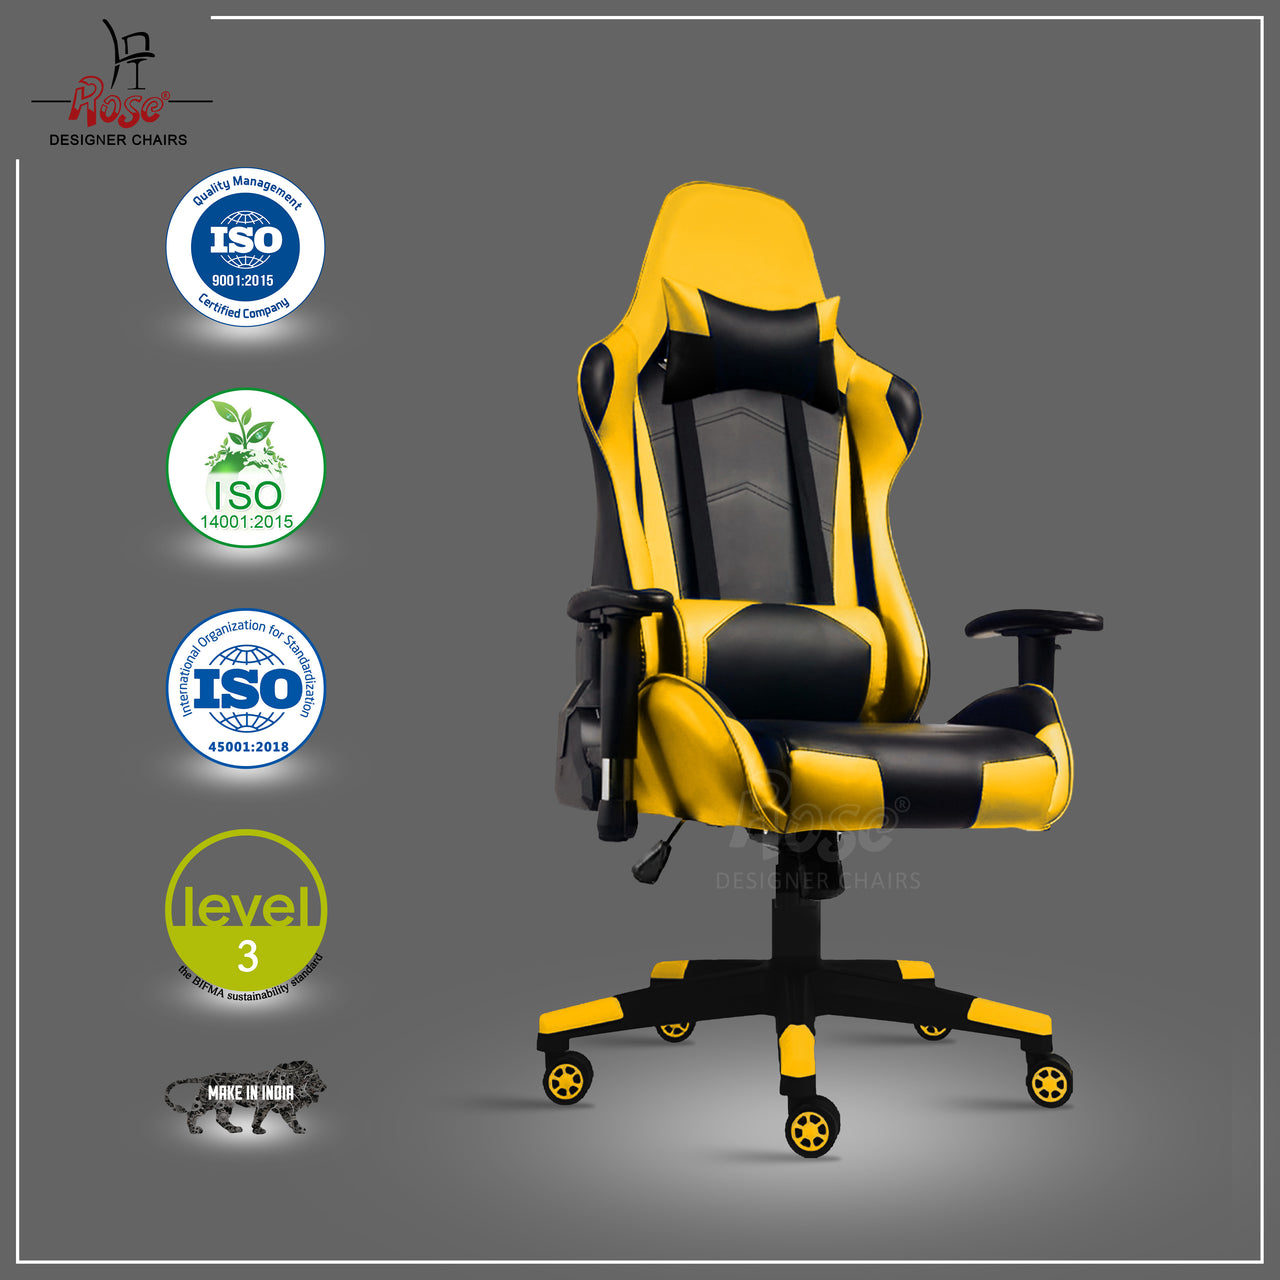 Up Gamer Multi-Functional Footrest Ergonomic Gaming Chair with Lumbar Support | Adjustable Back Rest | Fixed Arm Rest | Ergonomic High Back Chair | Metal Frame & Pu Leather (Yellow & Black)